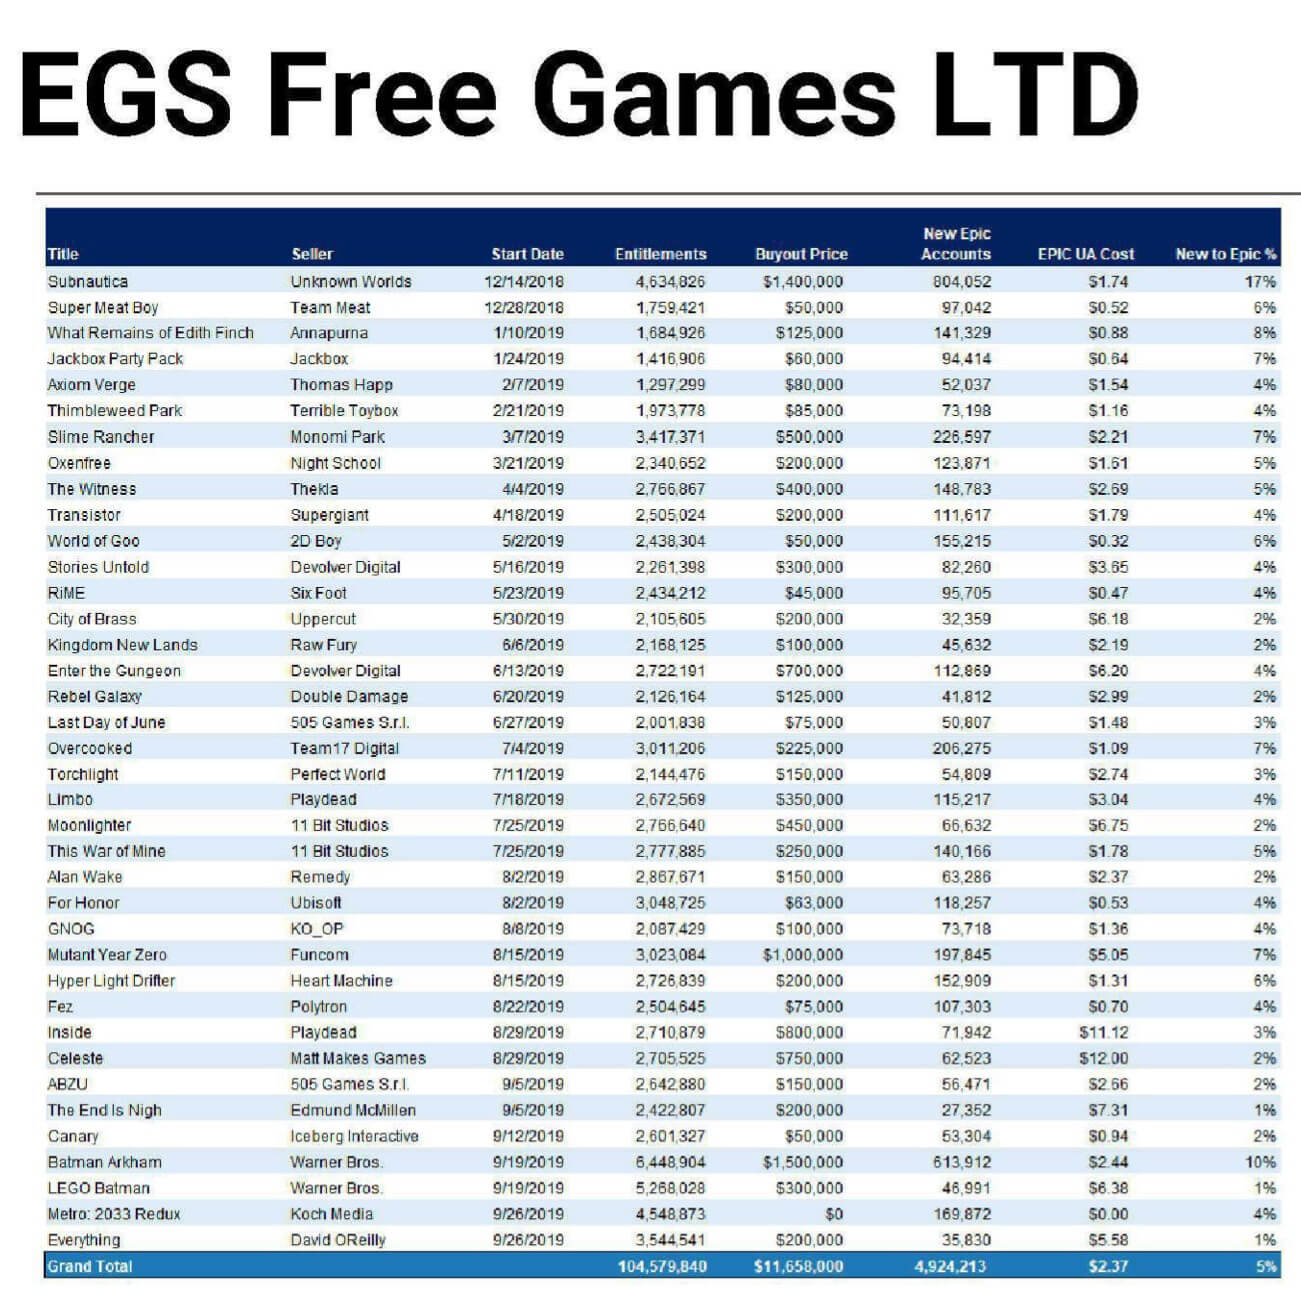 Epic Games free games leak could reveal the full list of free